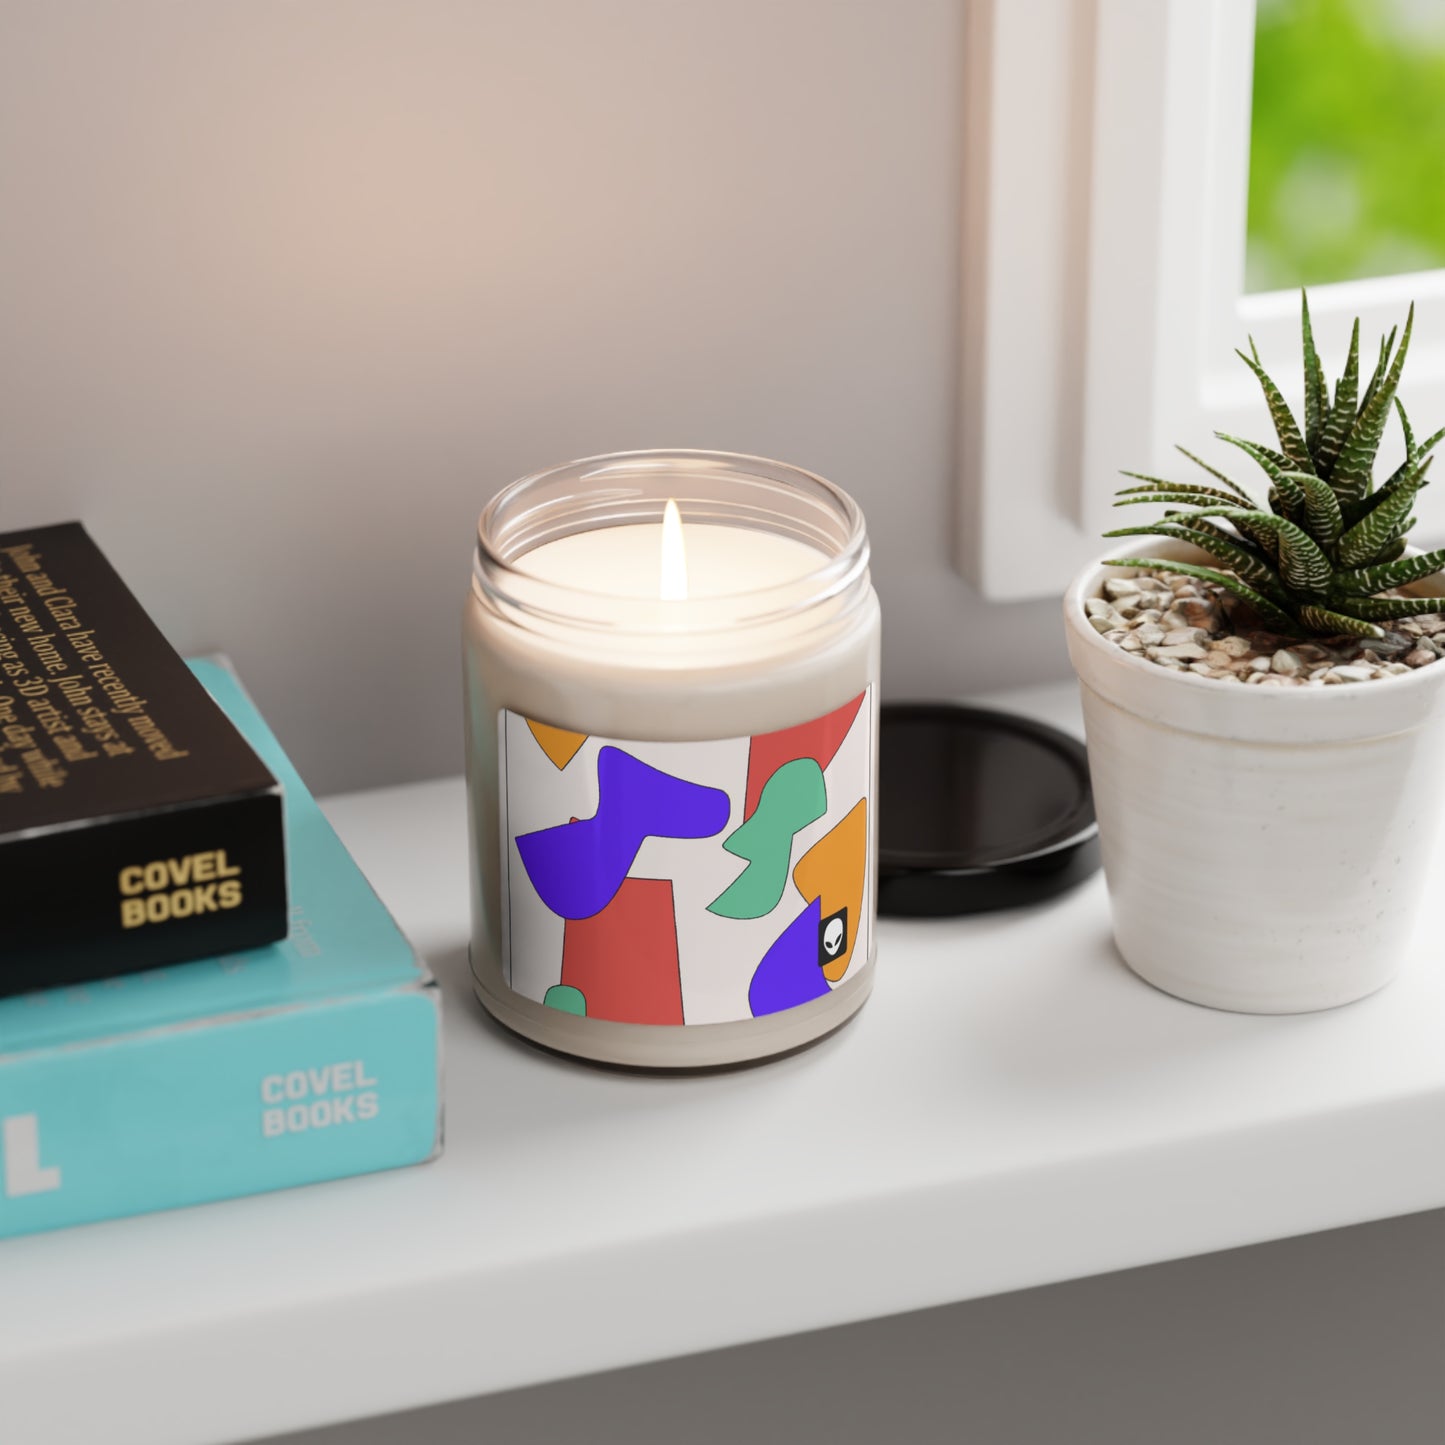 "A Beacon of Hope" - The Alien Eco-friendly Soy Candle